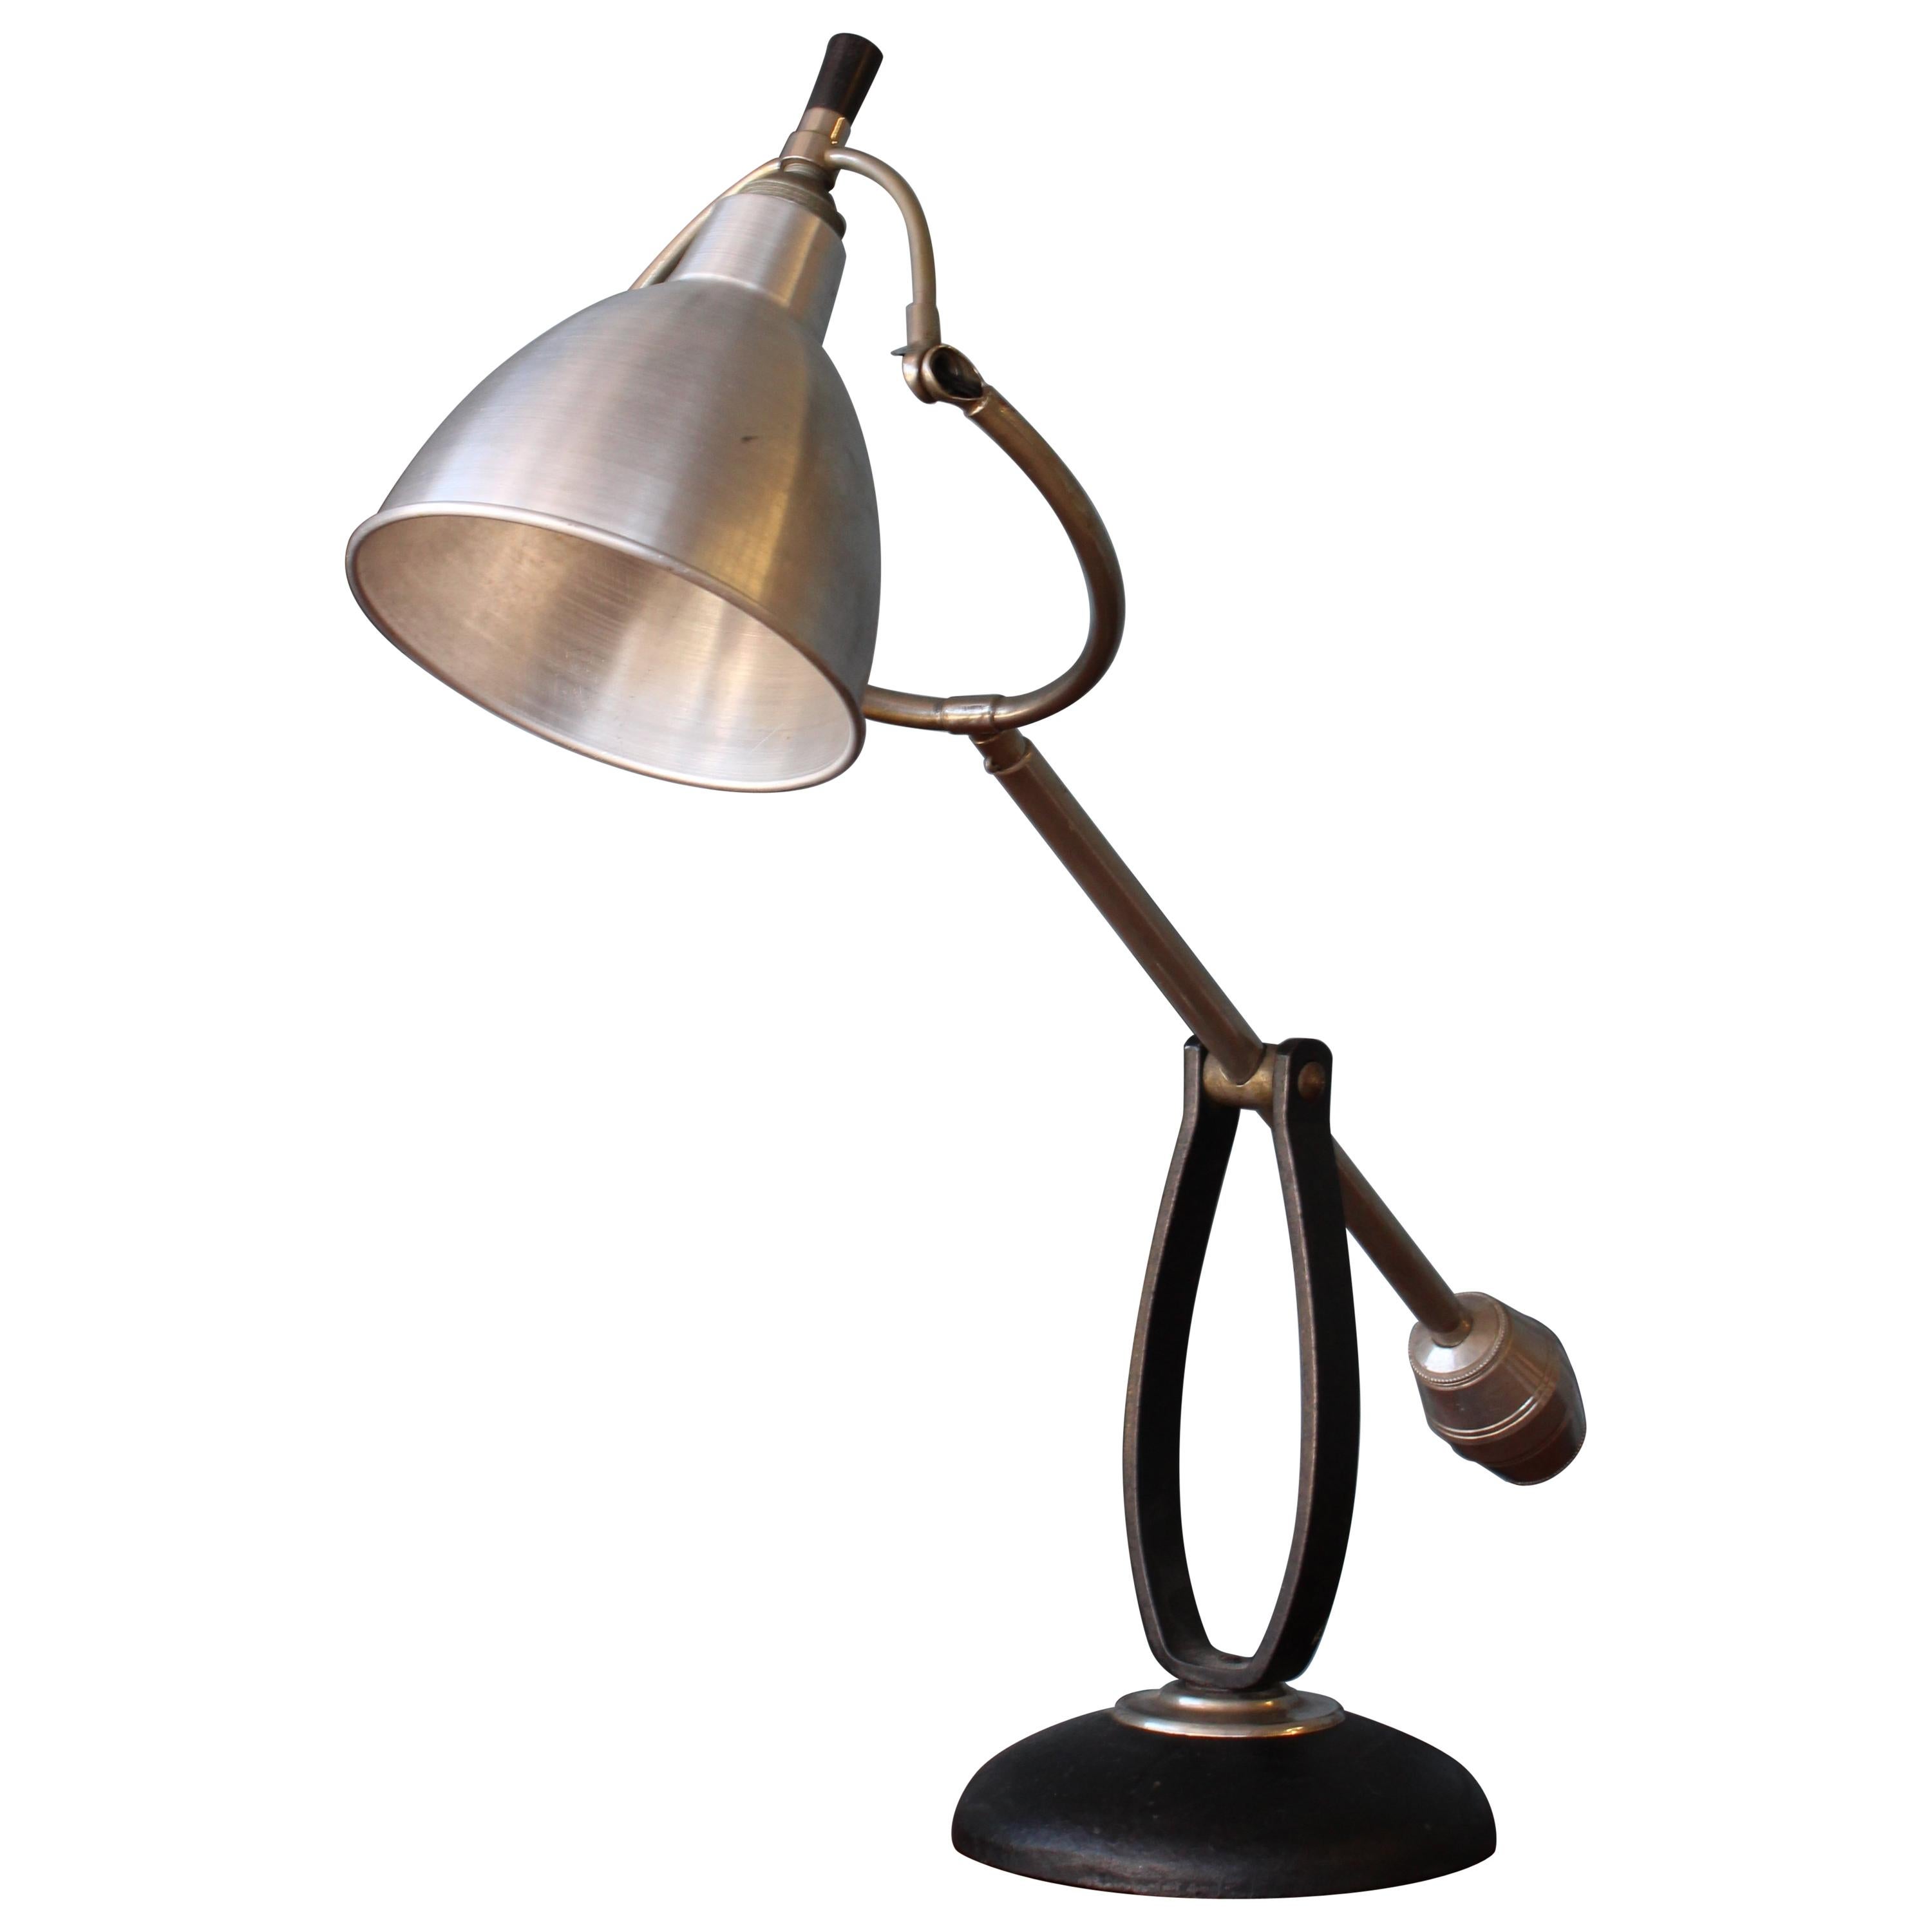 Industrial Lamp with Adjustable Head, 1940s, France.